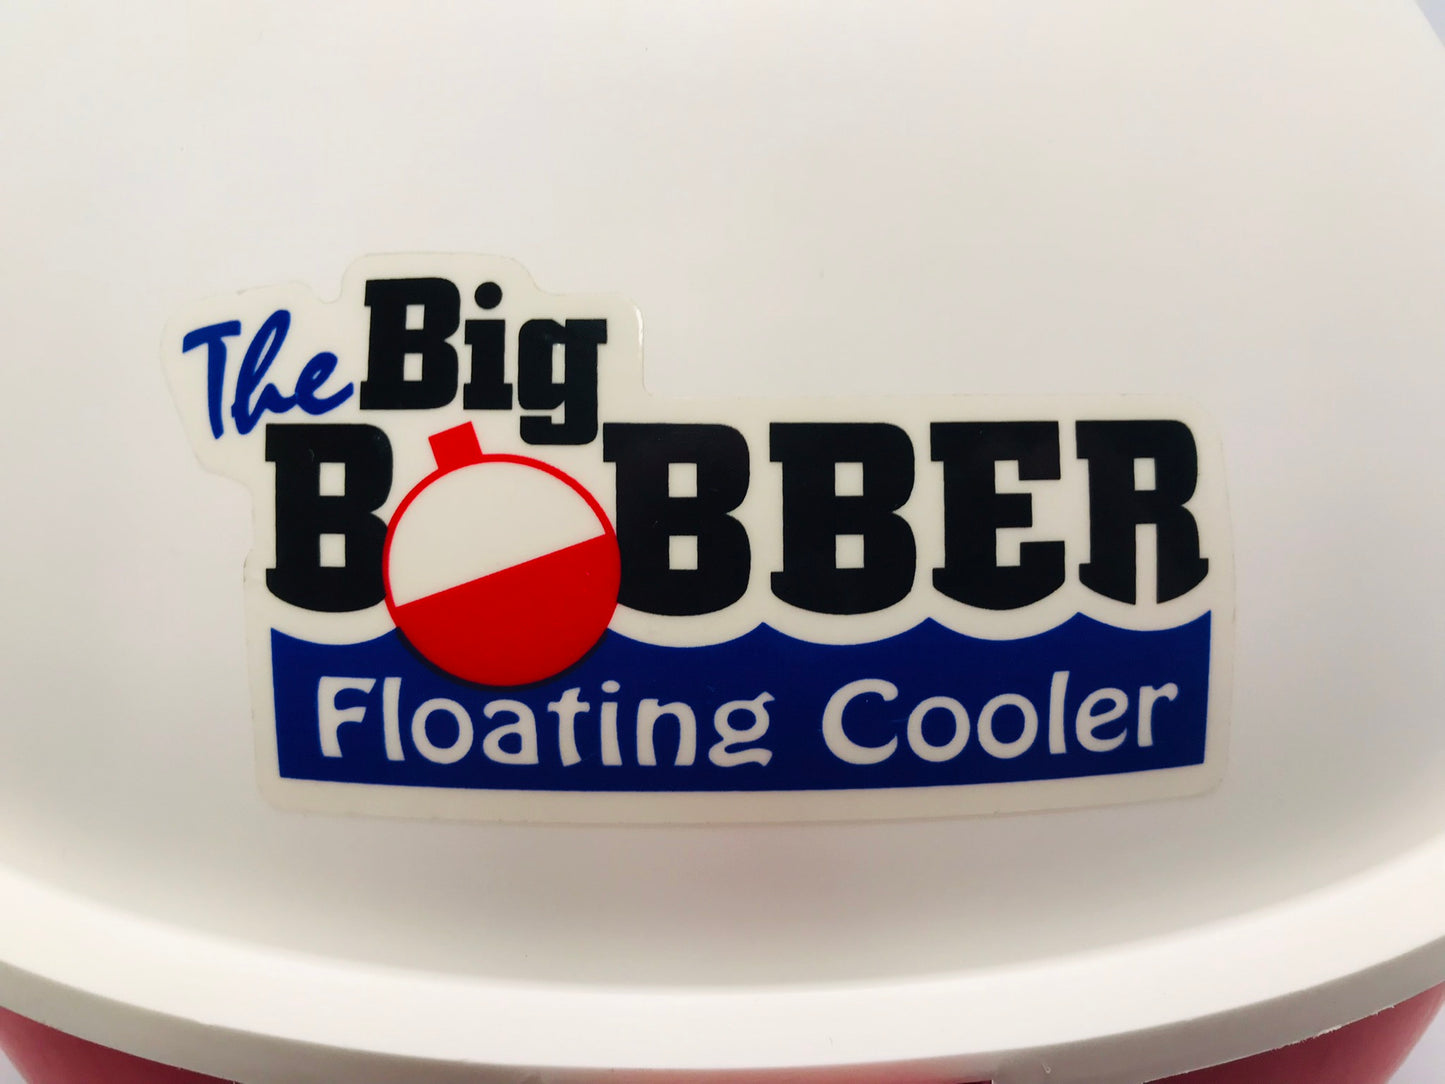 Camping Fishing Lake Big Bobber Floating Cooler NEW Attach to your inner tub or boat, surf board, and it floats along with you